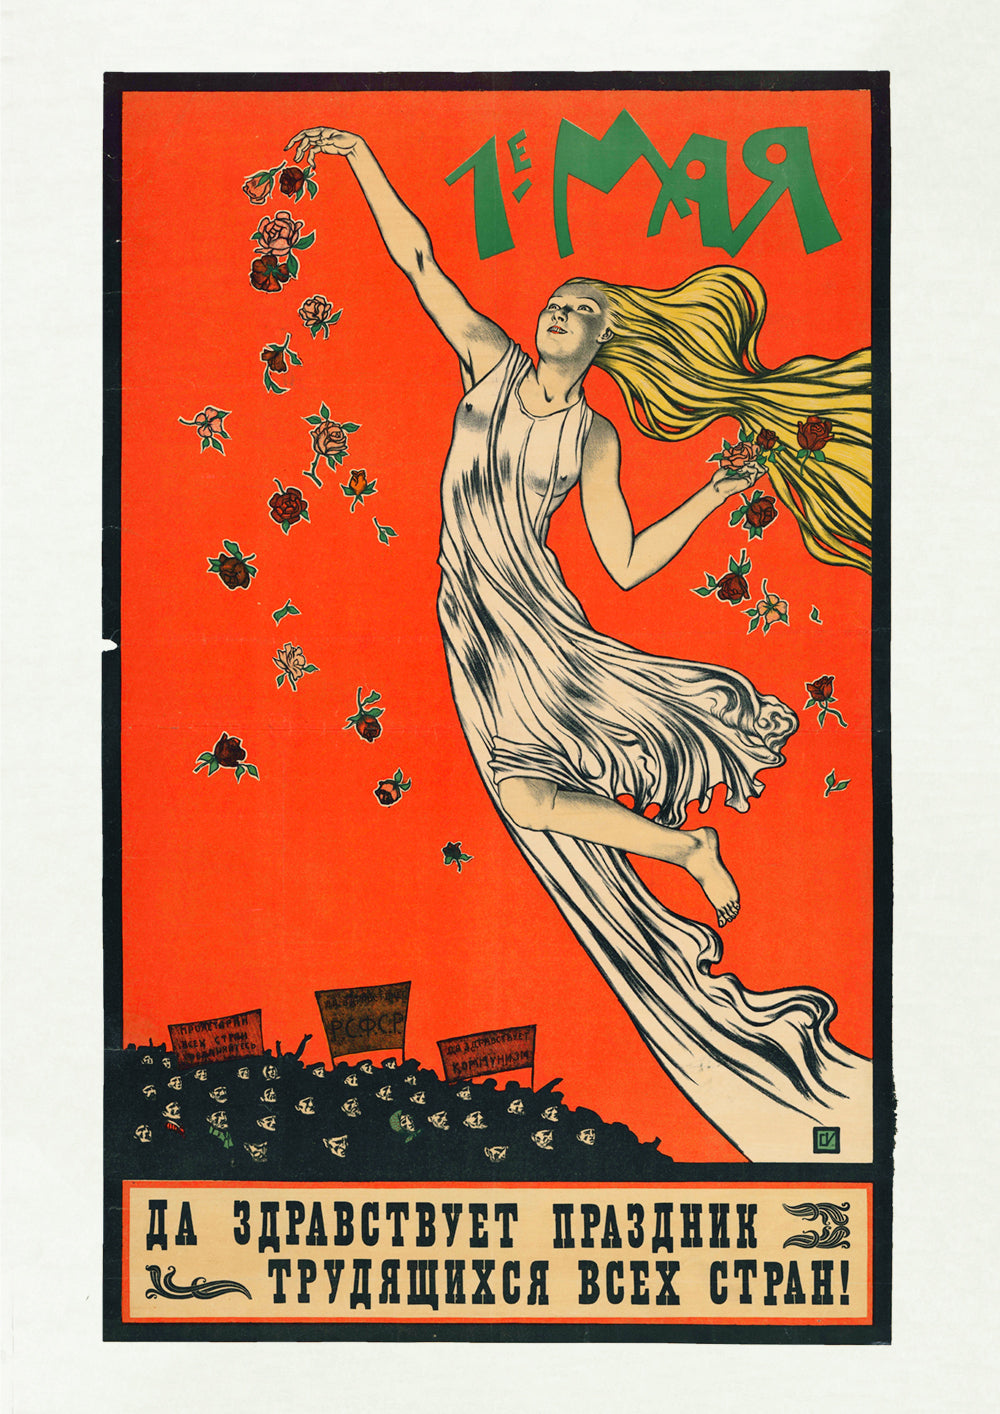 Long live the holiday of workers of all countries! — Soviet poster